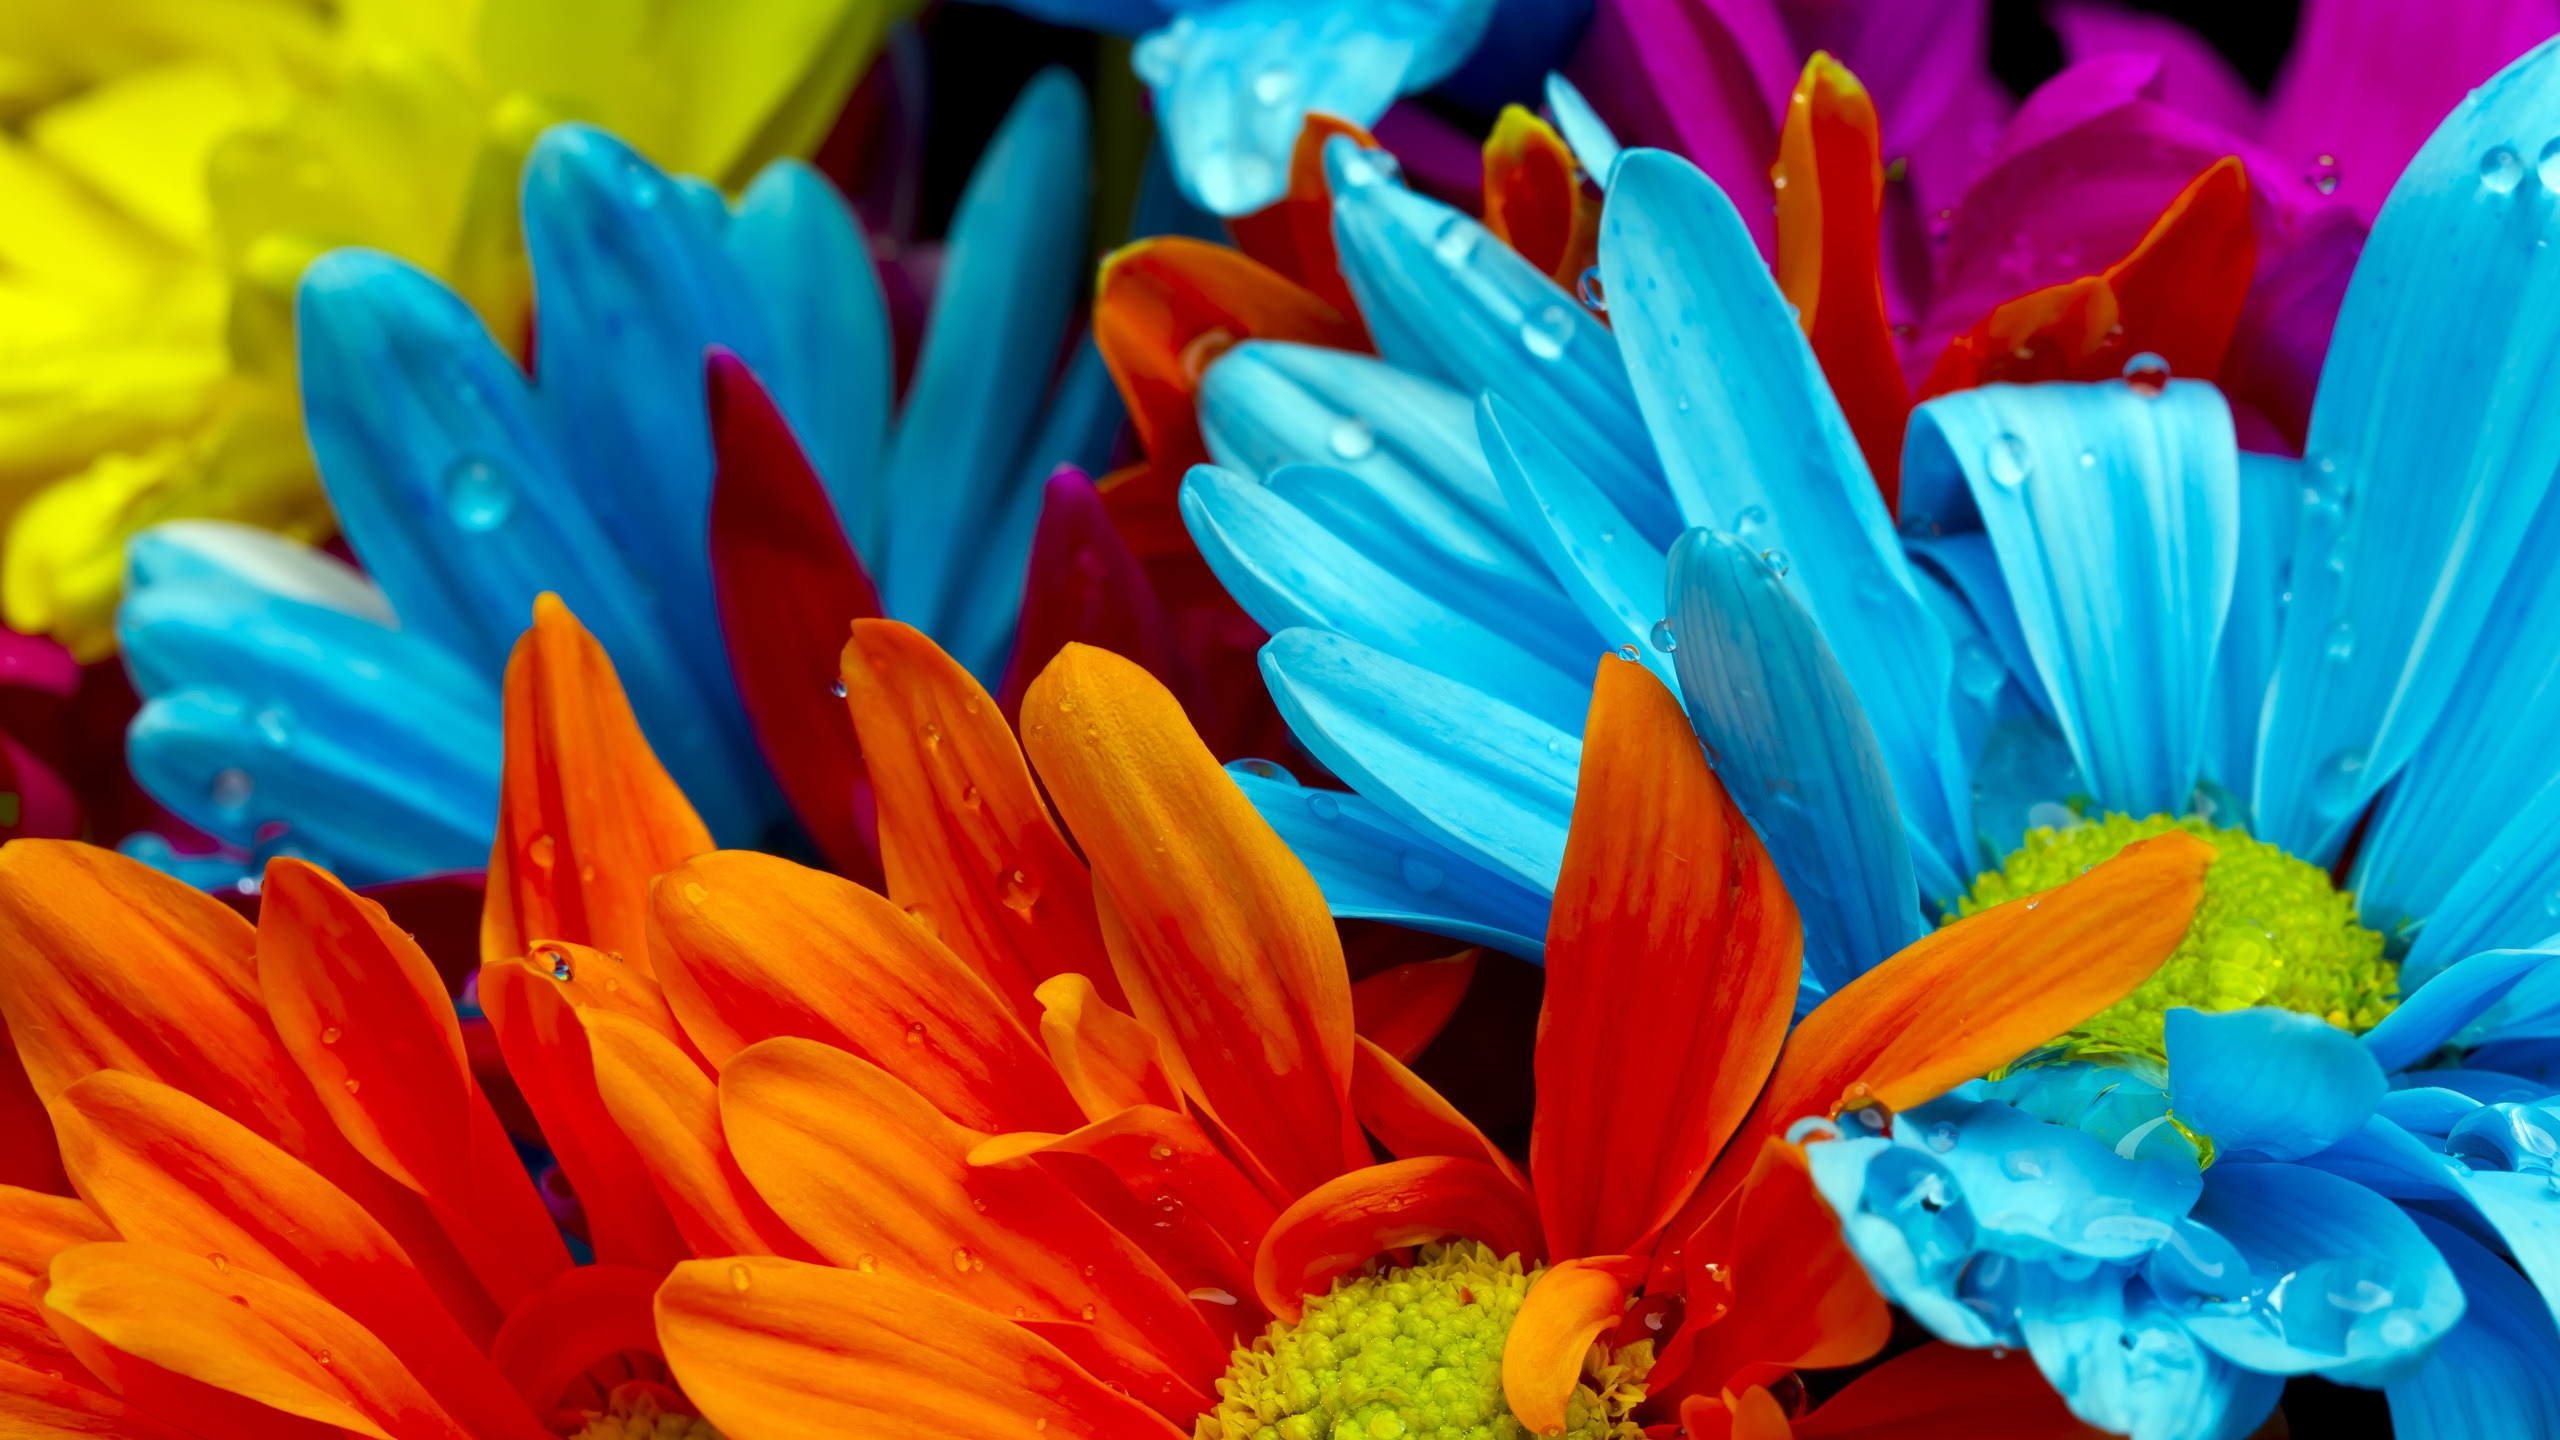 Colourful Gerbera Flowers for 2560x1440 HDTV resolution